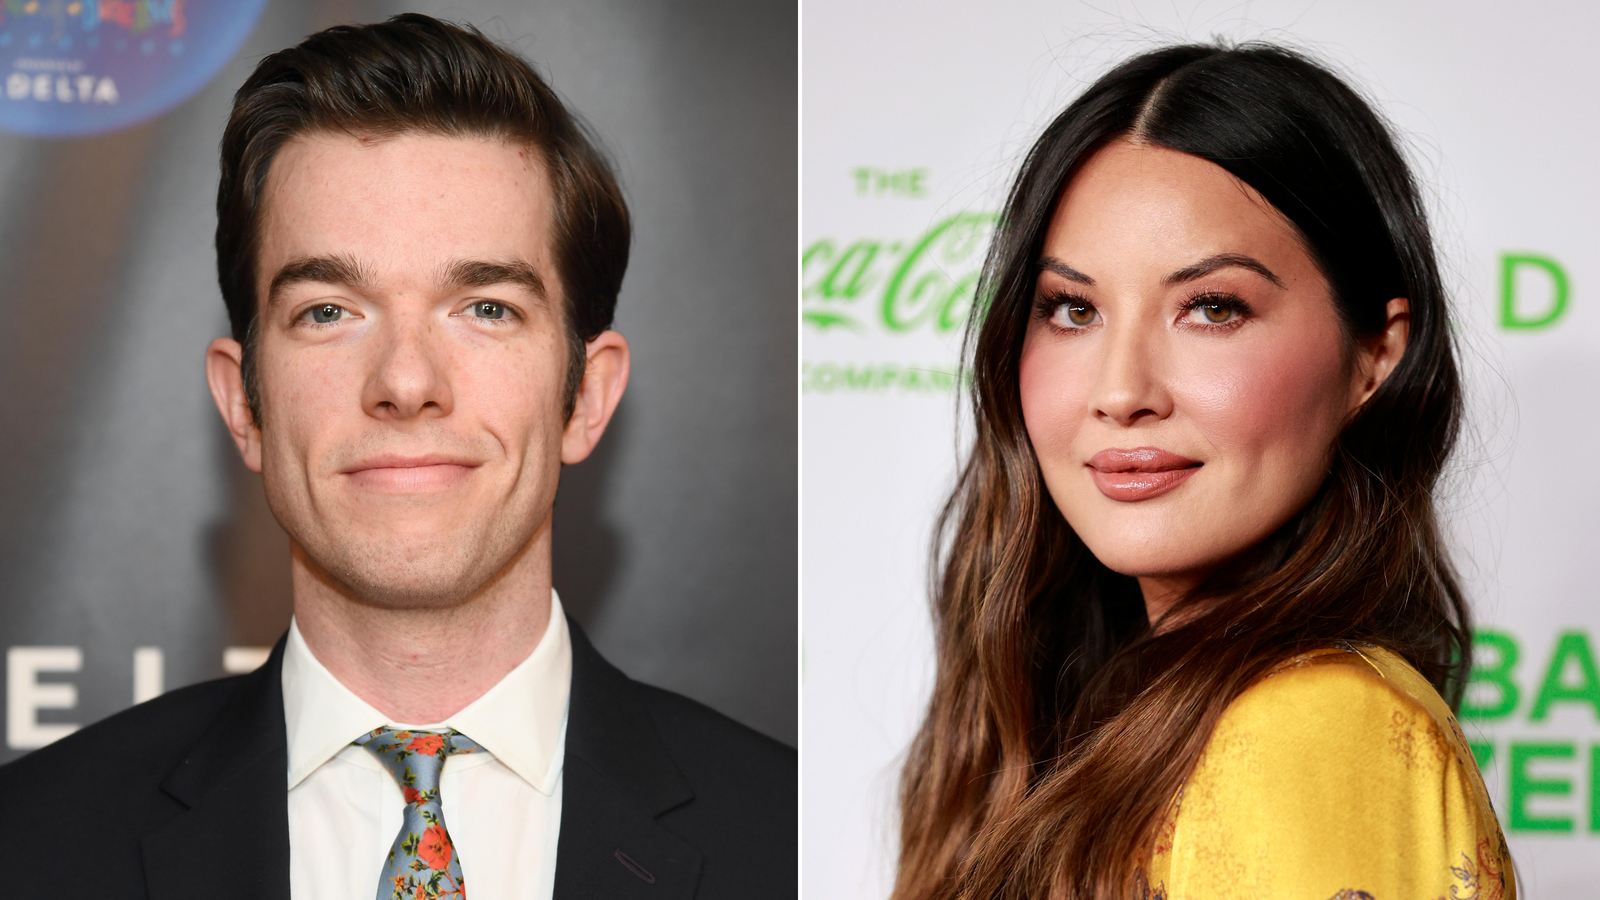 See John Mulaney reveal he and Olivia Munn are expecting a baby - CNN Video